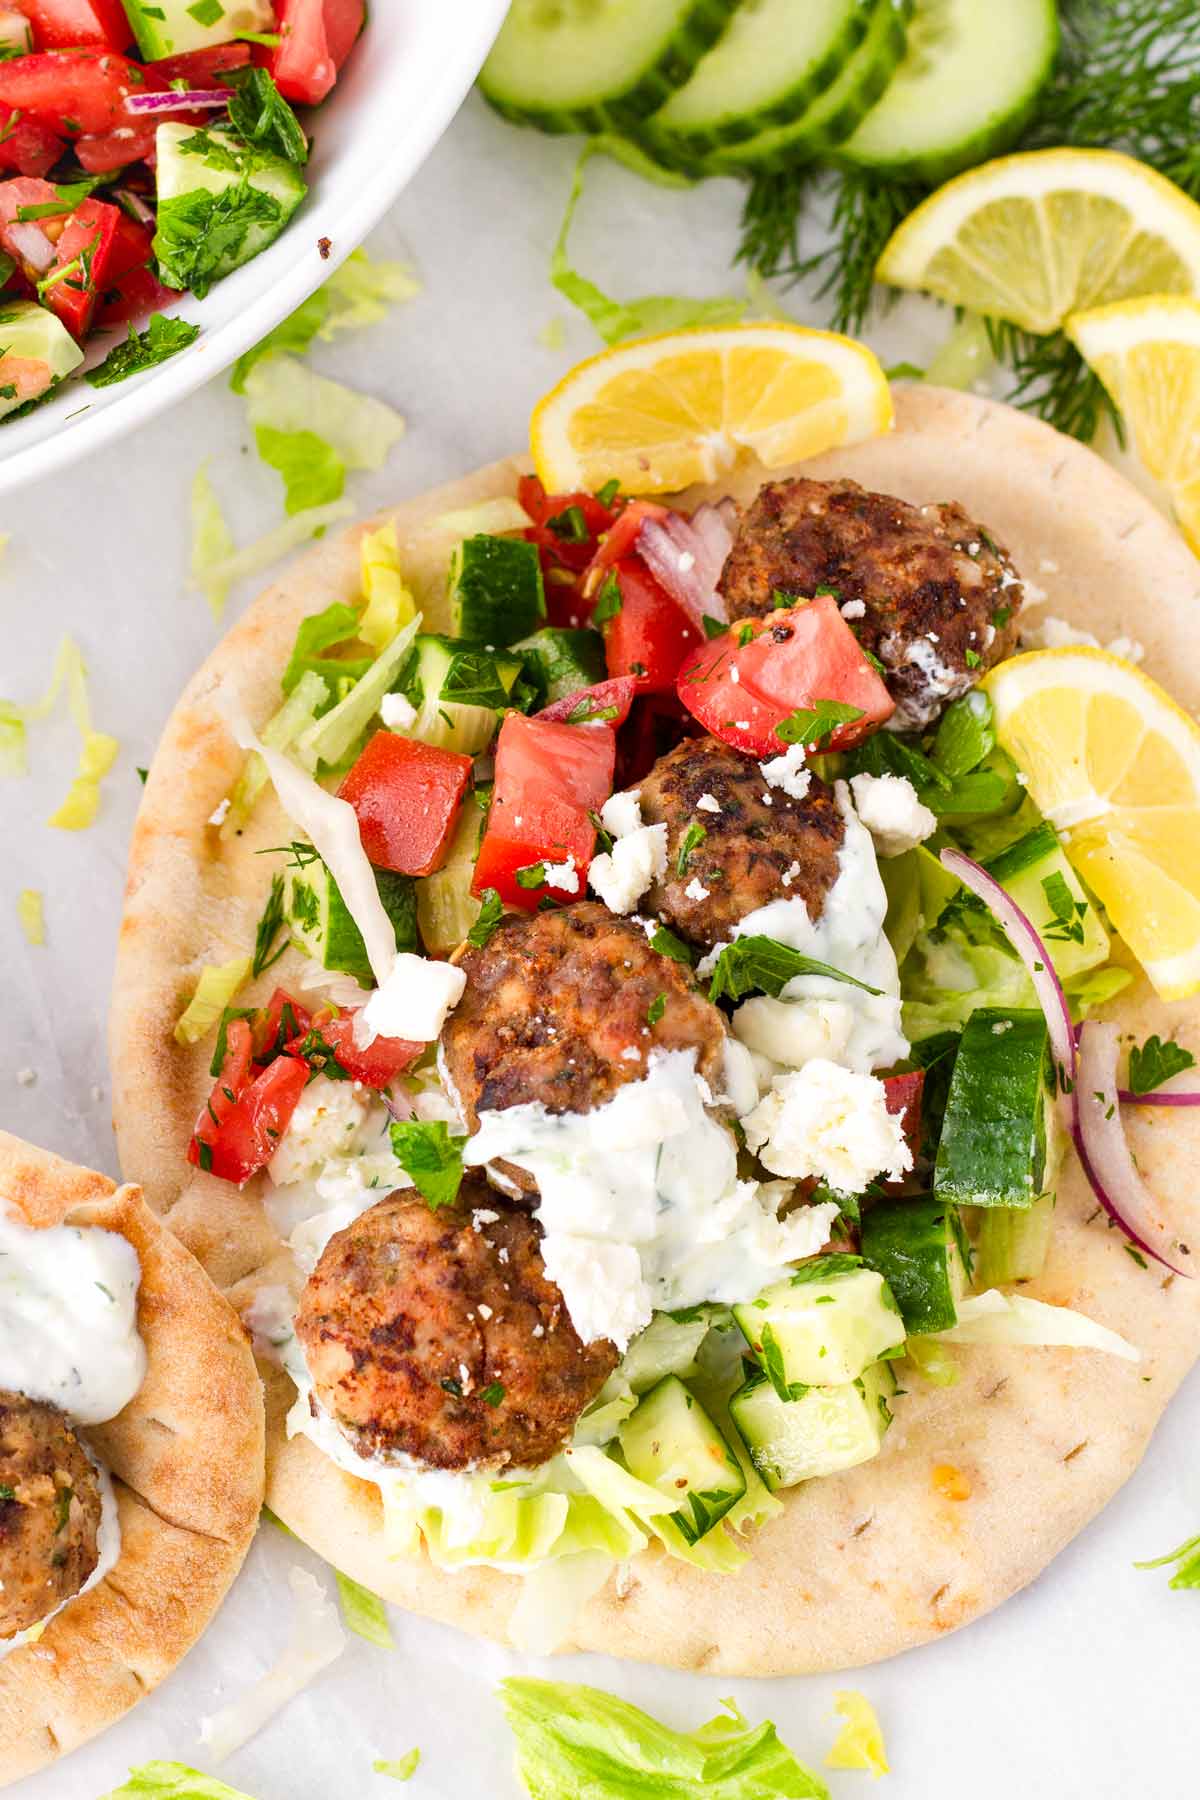 open face pita wraps with meatballs and toppings